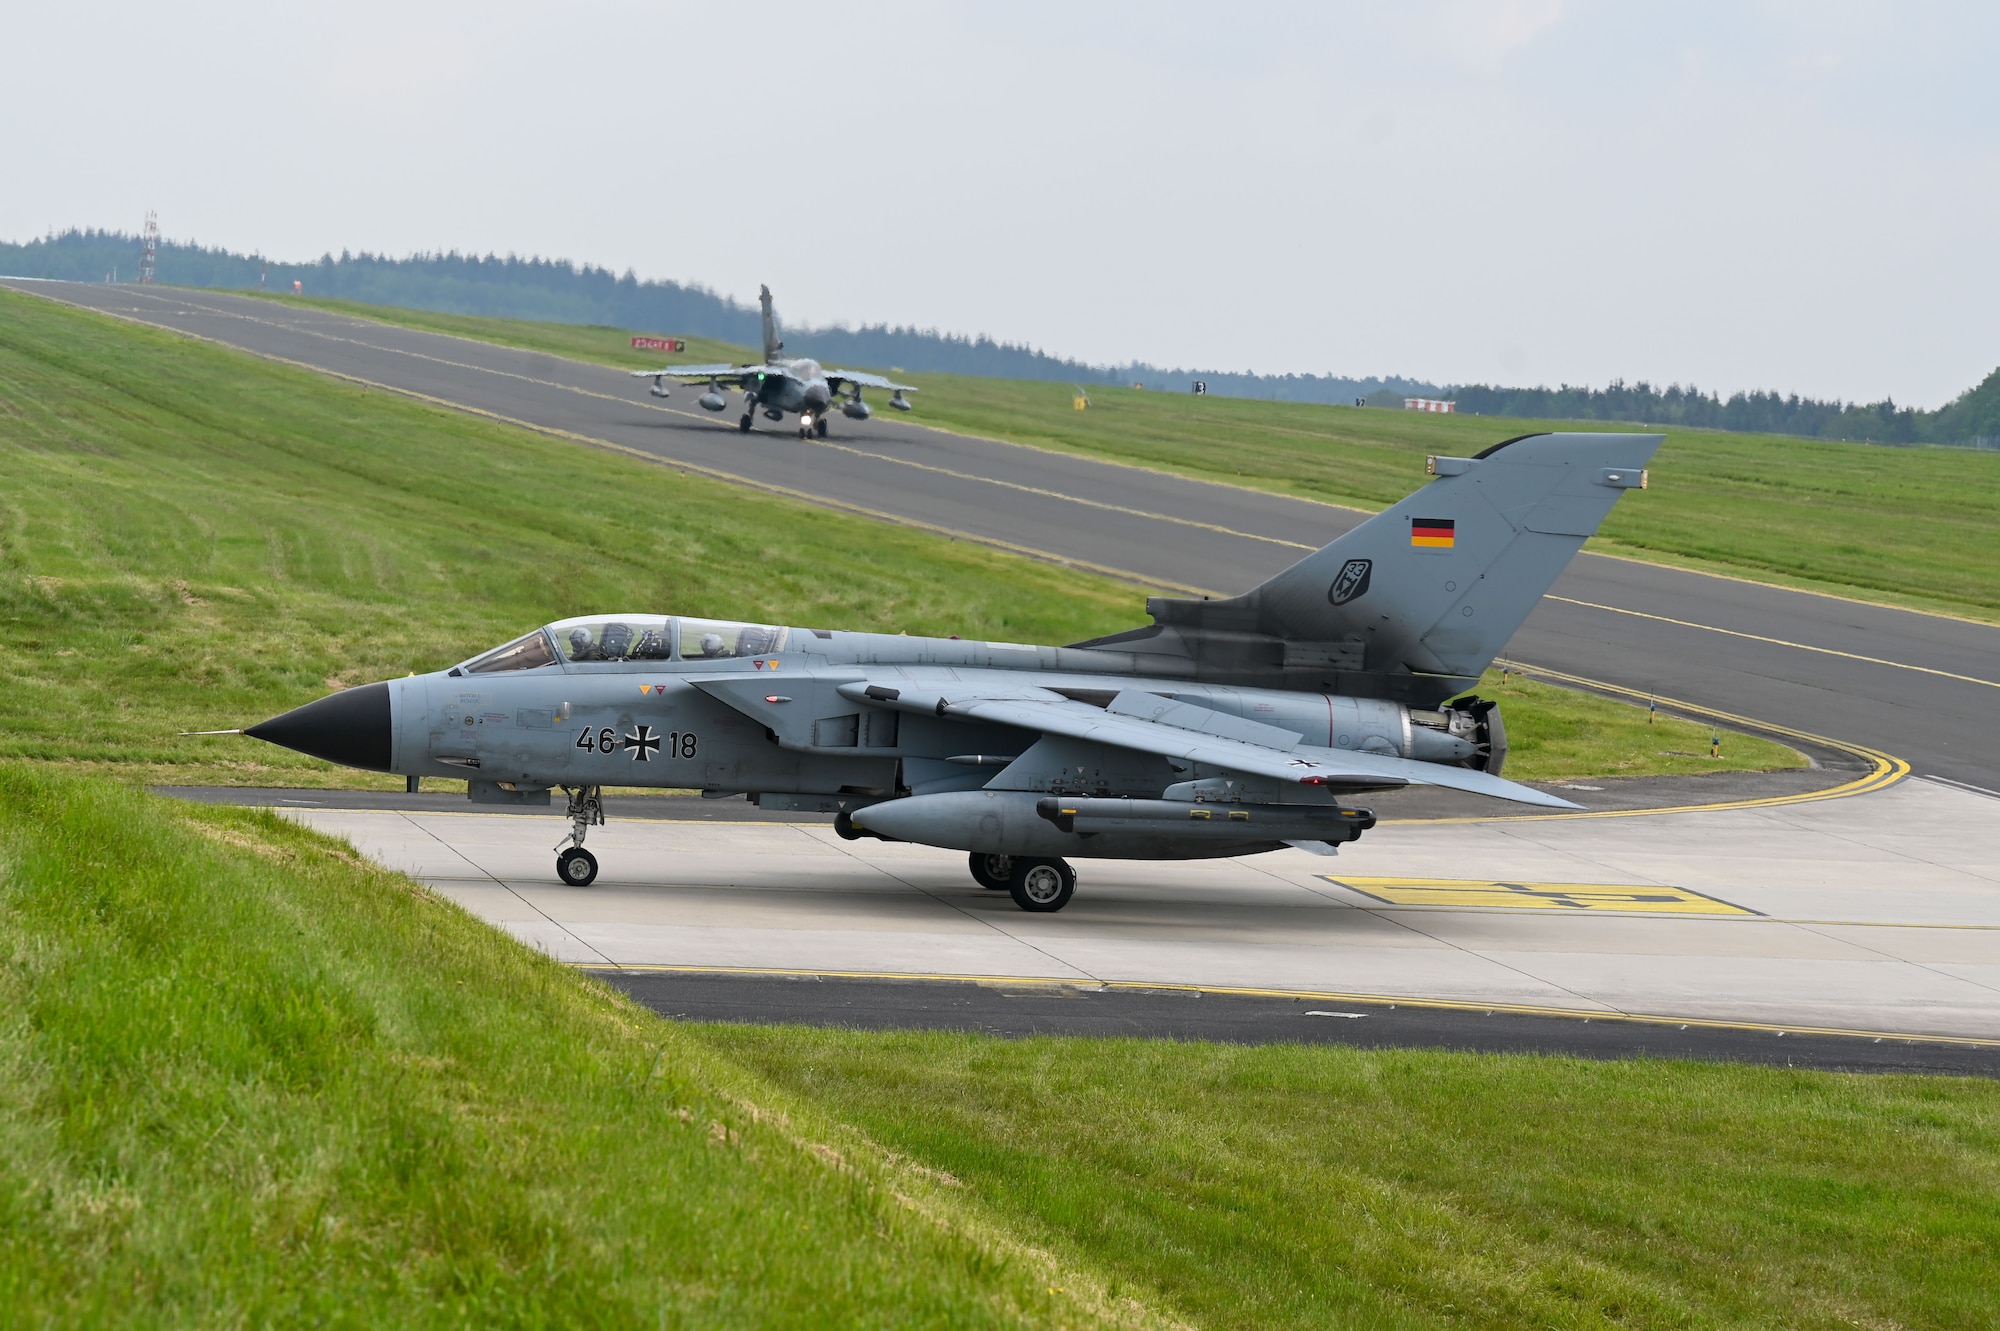 Two German Air Force PA-200 Tornado aircraft assigned to Tactical Air Wing 33, Büchel Air Base, Germany, taxi at Spangdahlem AB, Germany, May 15, 2023. The Tornado aircraft will be stationed at Spangdahlem AB, providing the opportunity for bilateral training flights between the 52nd Fighter Wing and the 33rd Tactical AW. (U.S. Air Force photo by Senior Airman Jessica Sanchez-Chen)